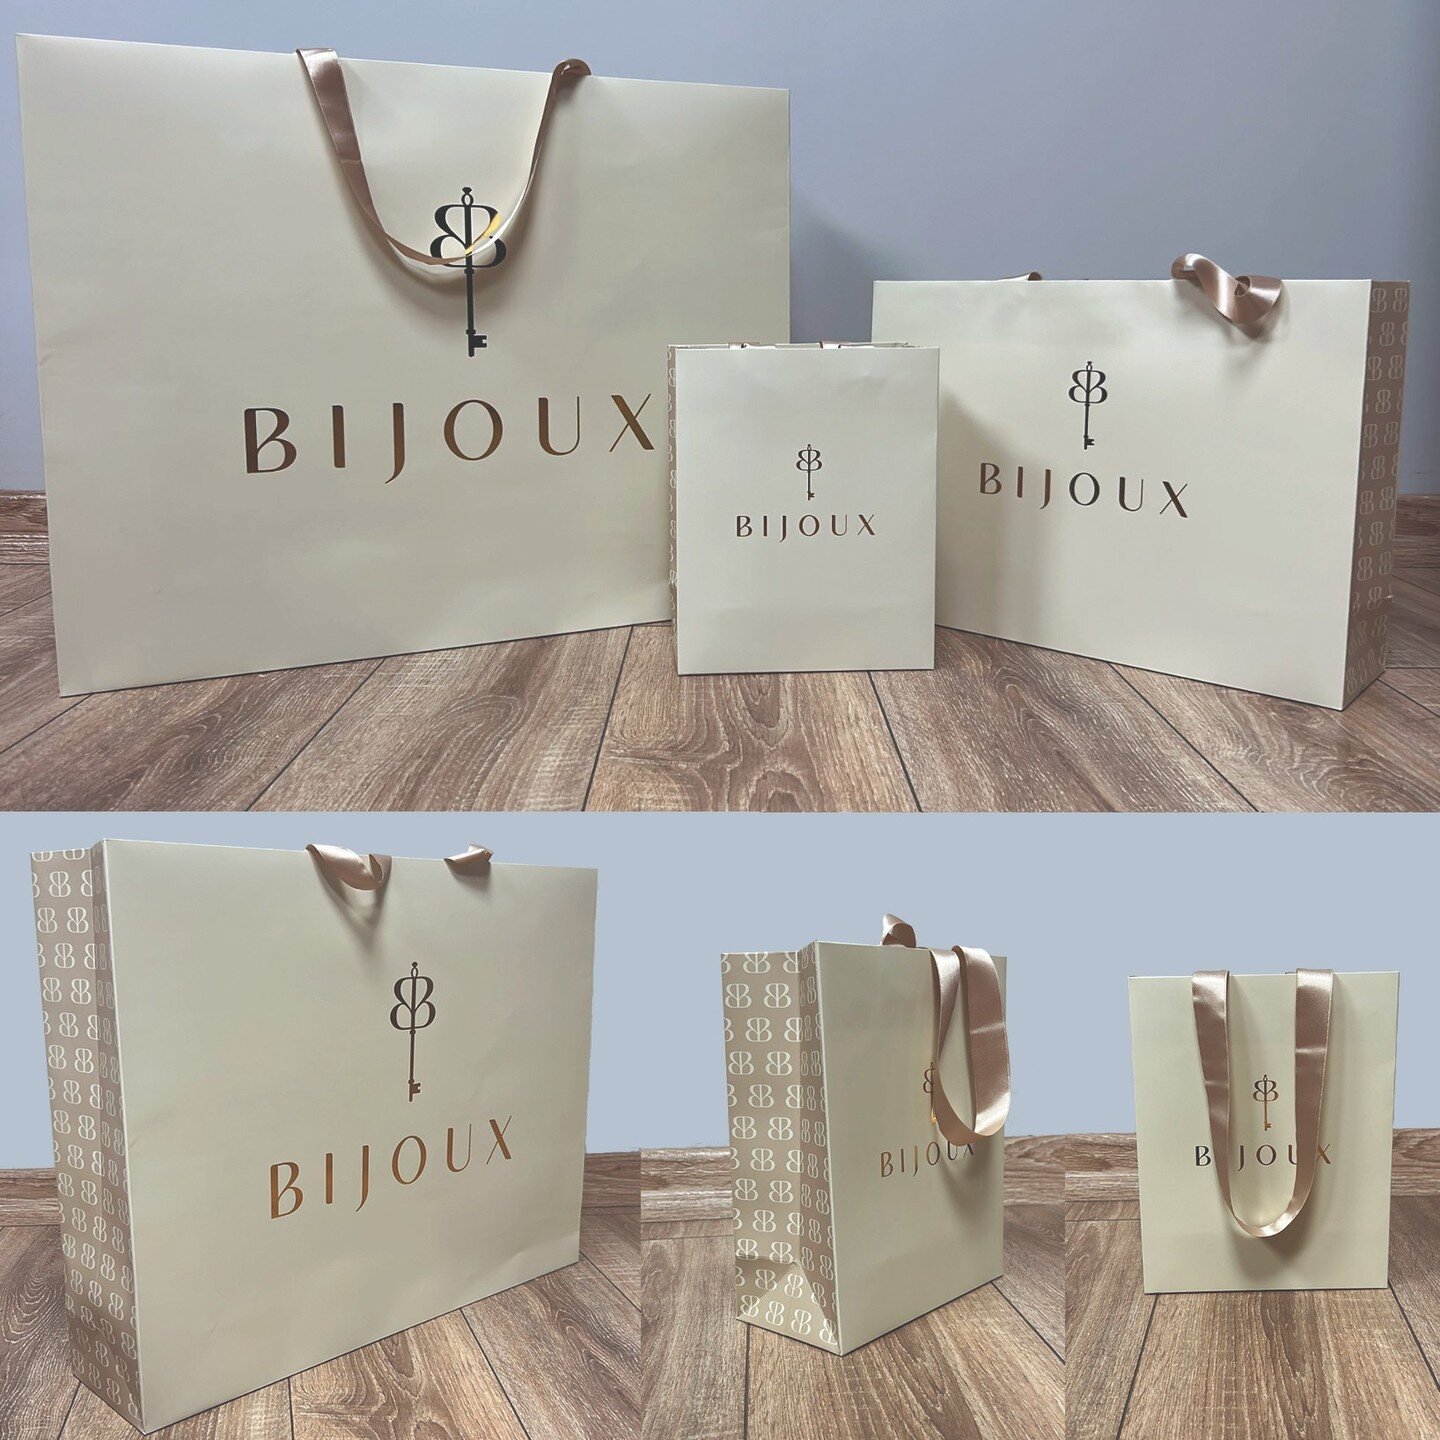 A beautiful bag set for a beautiful store..we love these for @bijoux_bridal so stylish with gold foiling and silk ribbon 😍

We can help with every aspect of your stationary and branded materials for your boutique 💗

With decades of experience, we&r